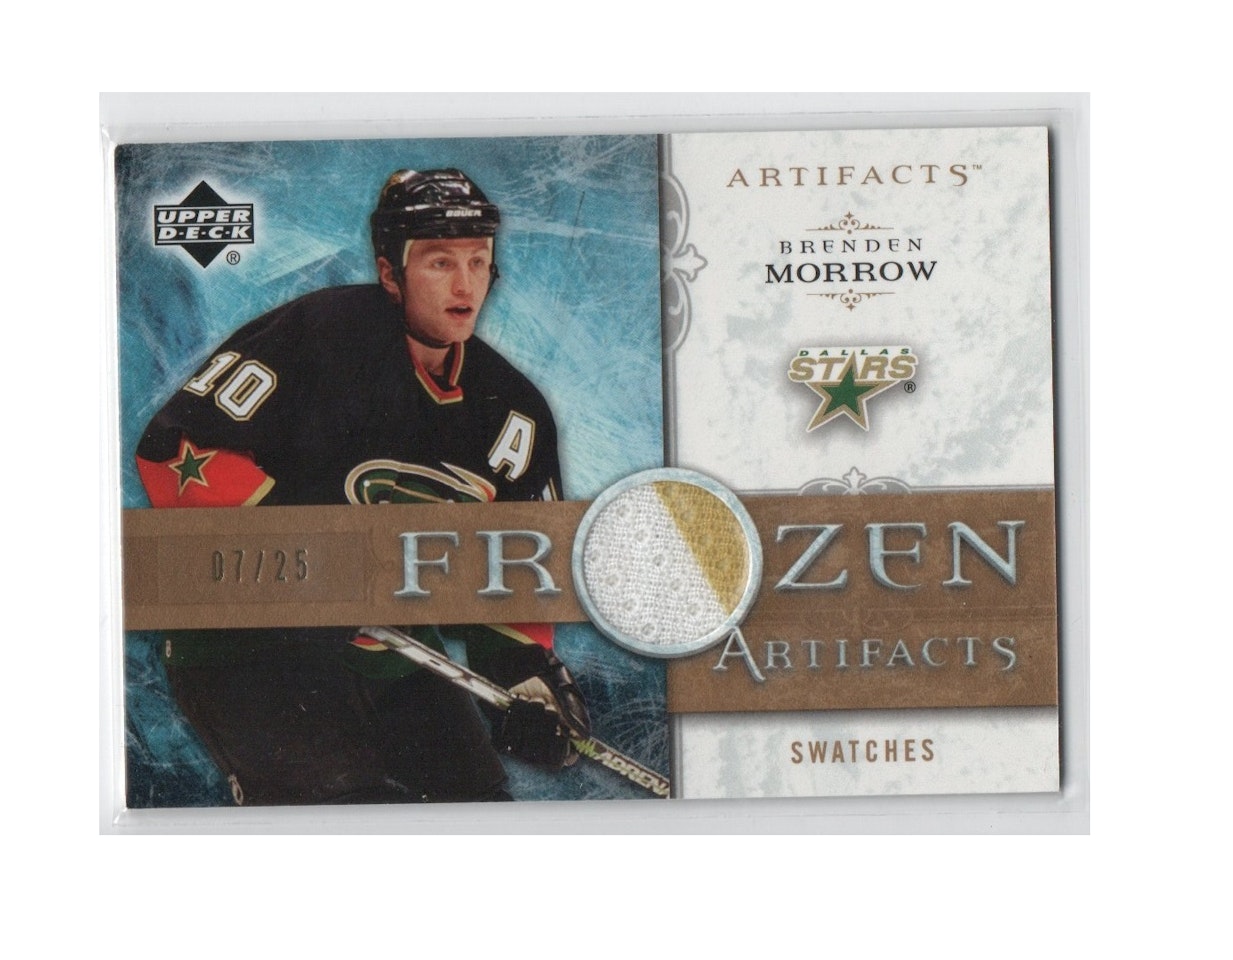 2006-07 Artifacts Frozen Artifacts Gold #FABM Brenden Morrow (30-X233-GAMEUSED-SERIAL-NHLSTARS)